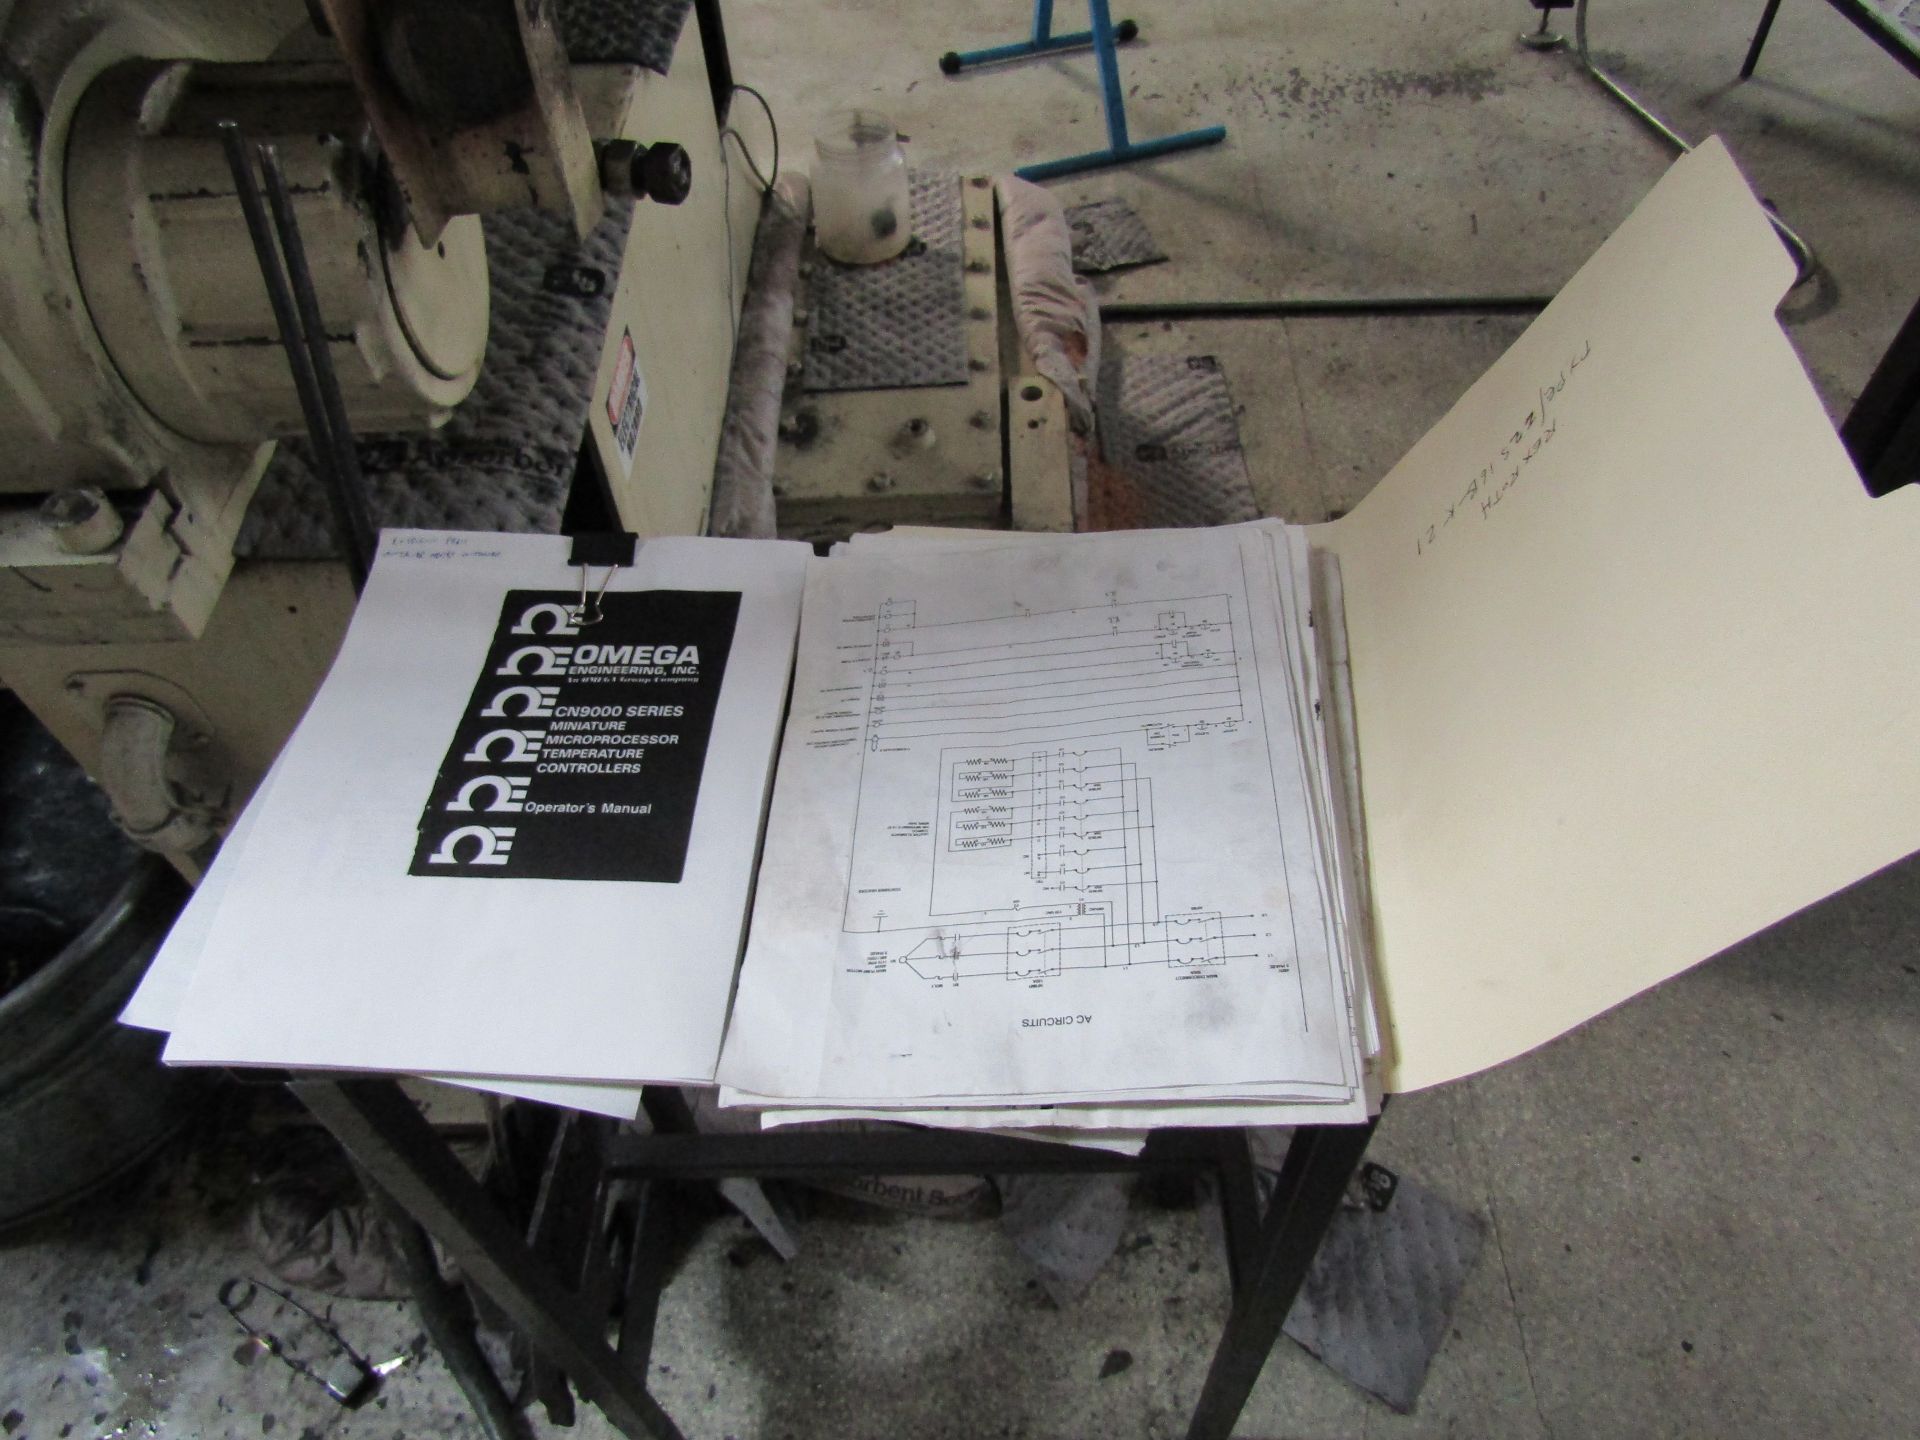 1992 MITSUBISHI 610 MG-110 4 Post Horizontal Extrusion Press With Electrical Controls, Operator - Image 11 of 11